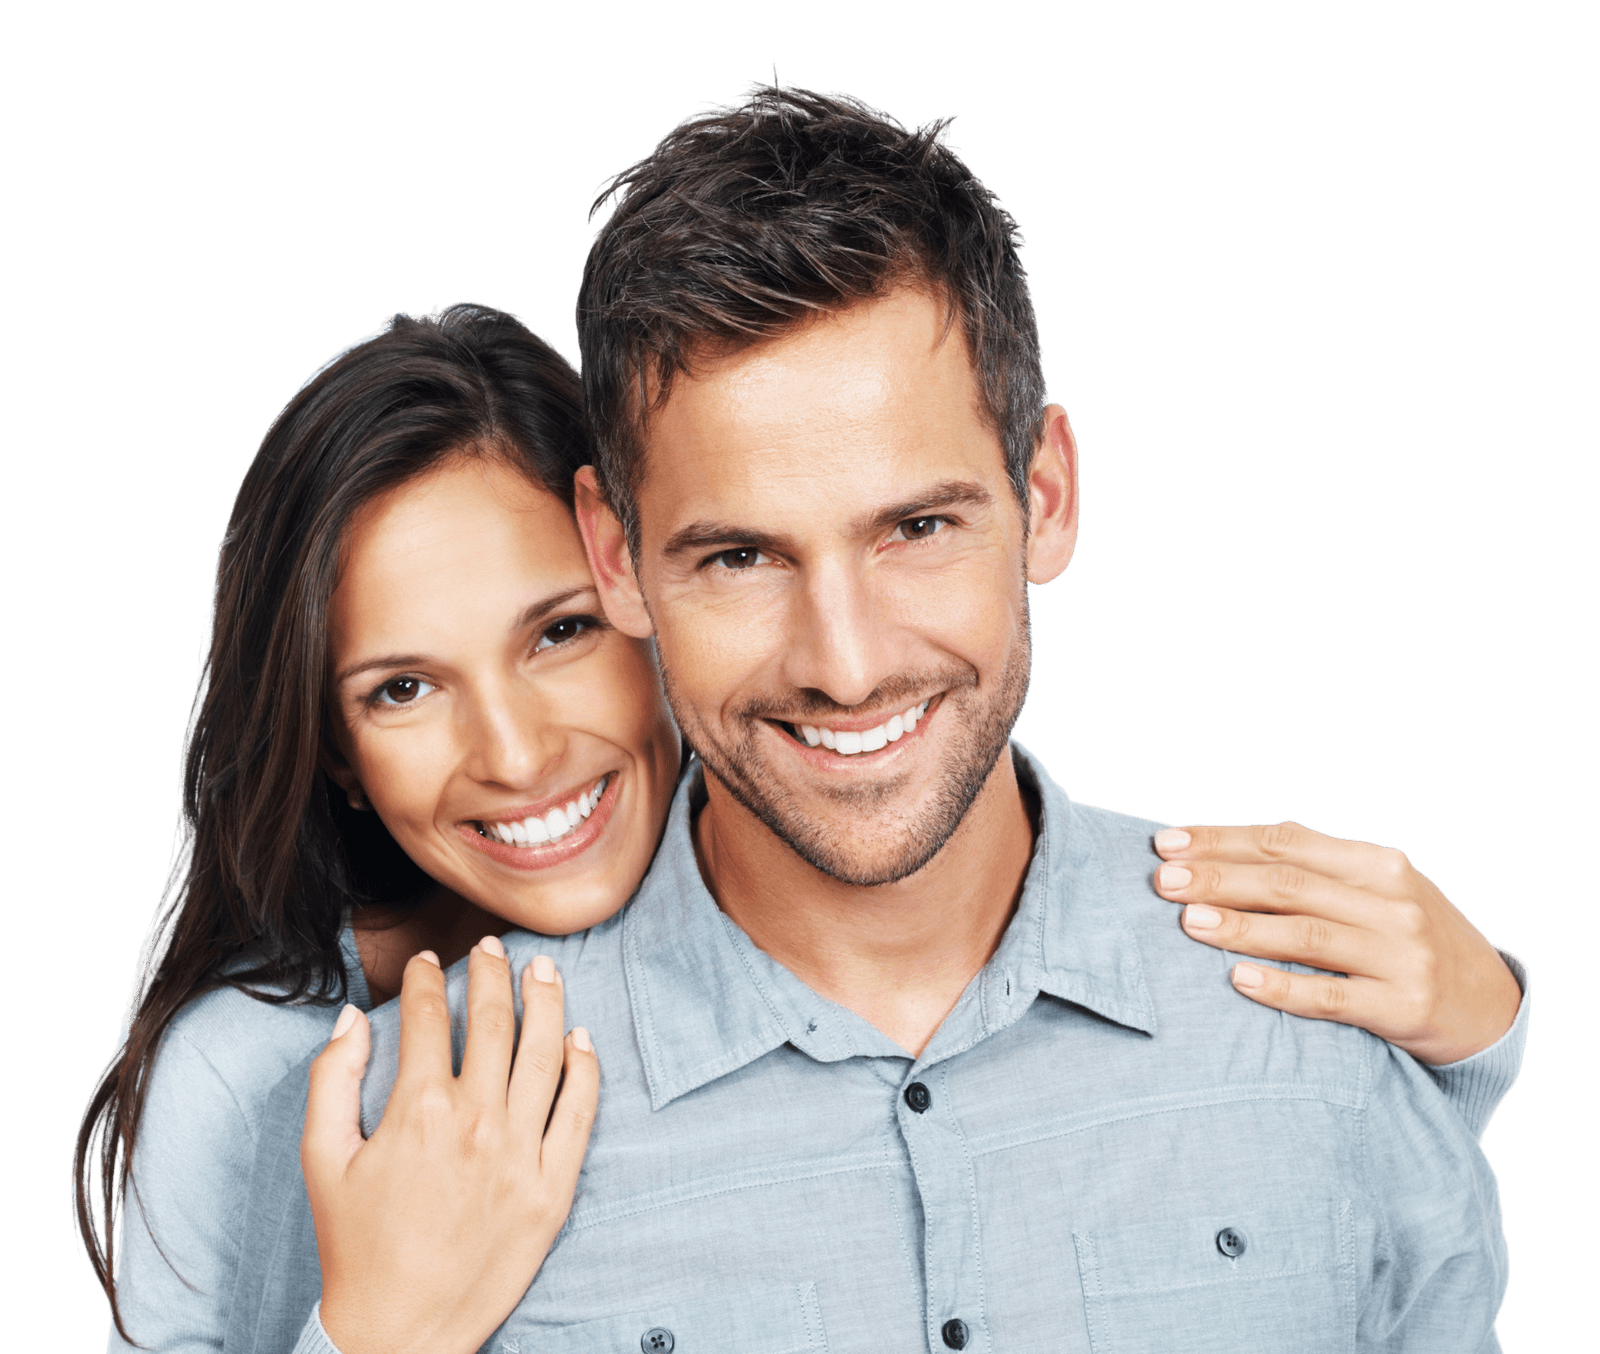 Main image for the "best dentists in London" page, showing a woman and man happy together, smiling, indicating excellent oral health and confidence